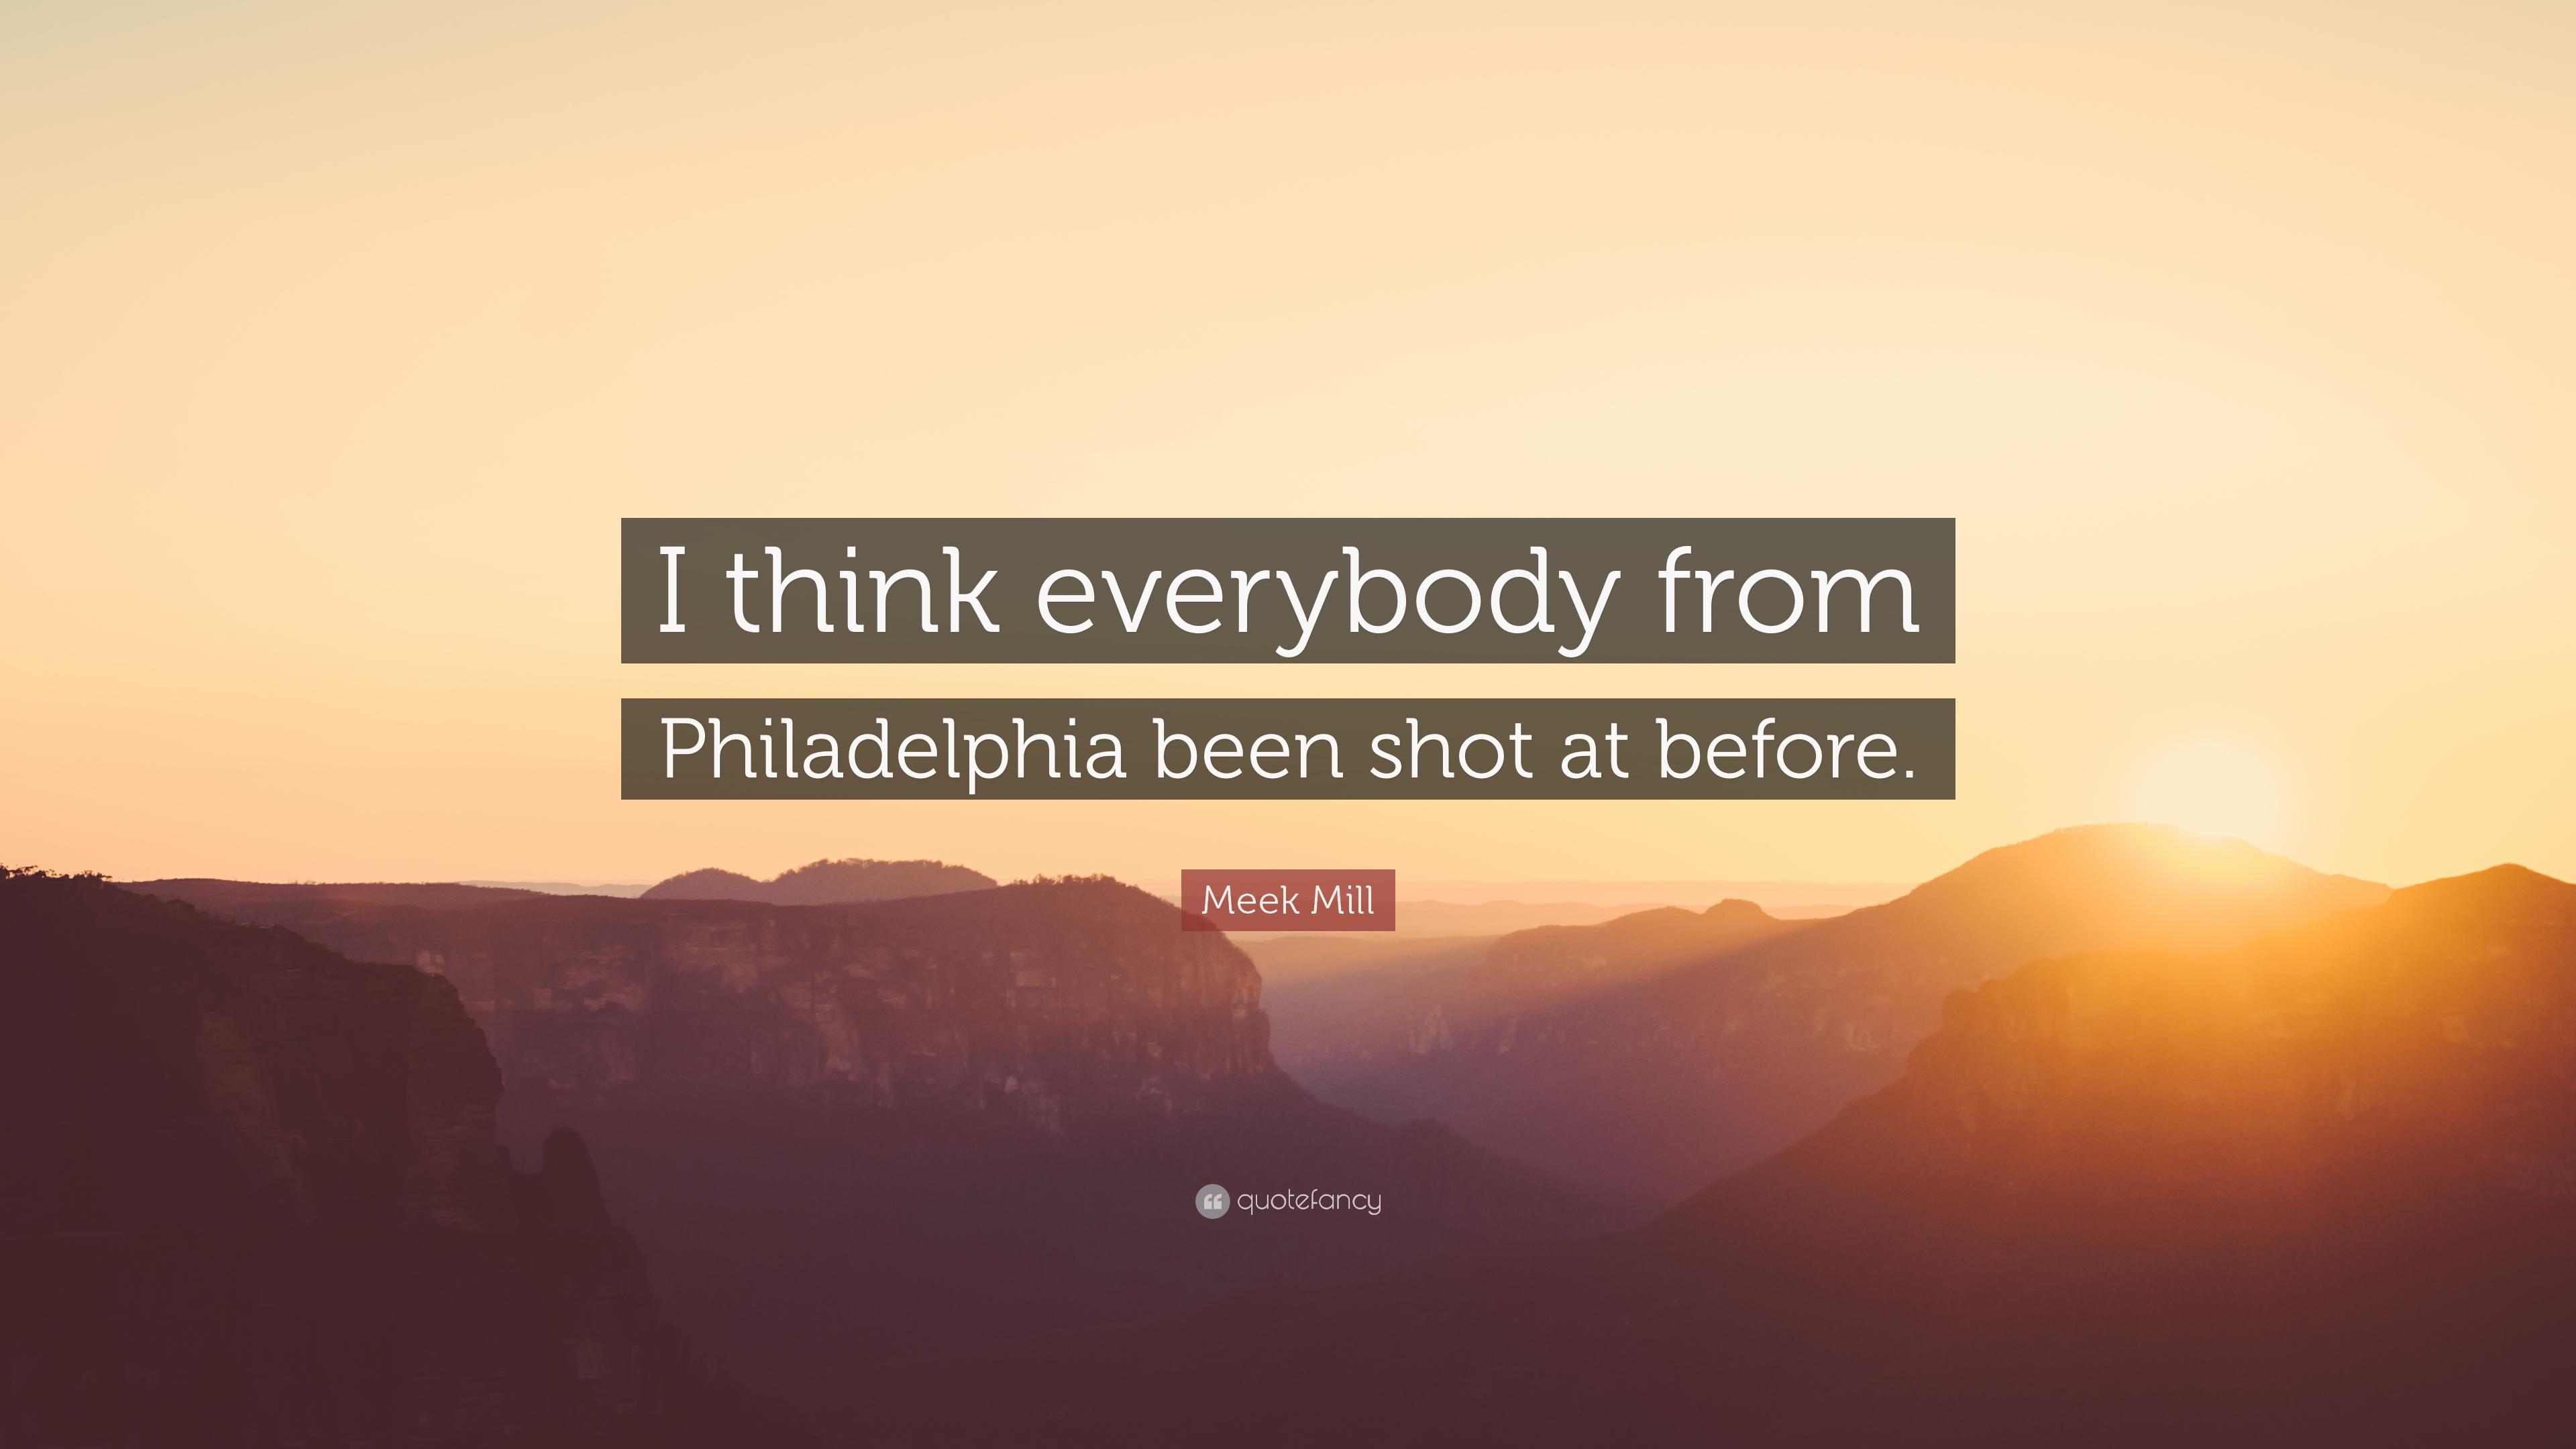 Meek Mill Quote: “I think everybody from Philadelphia been